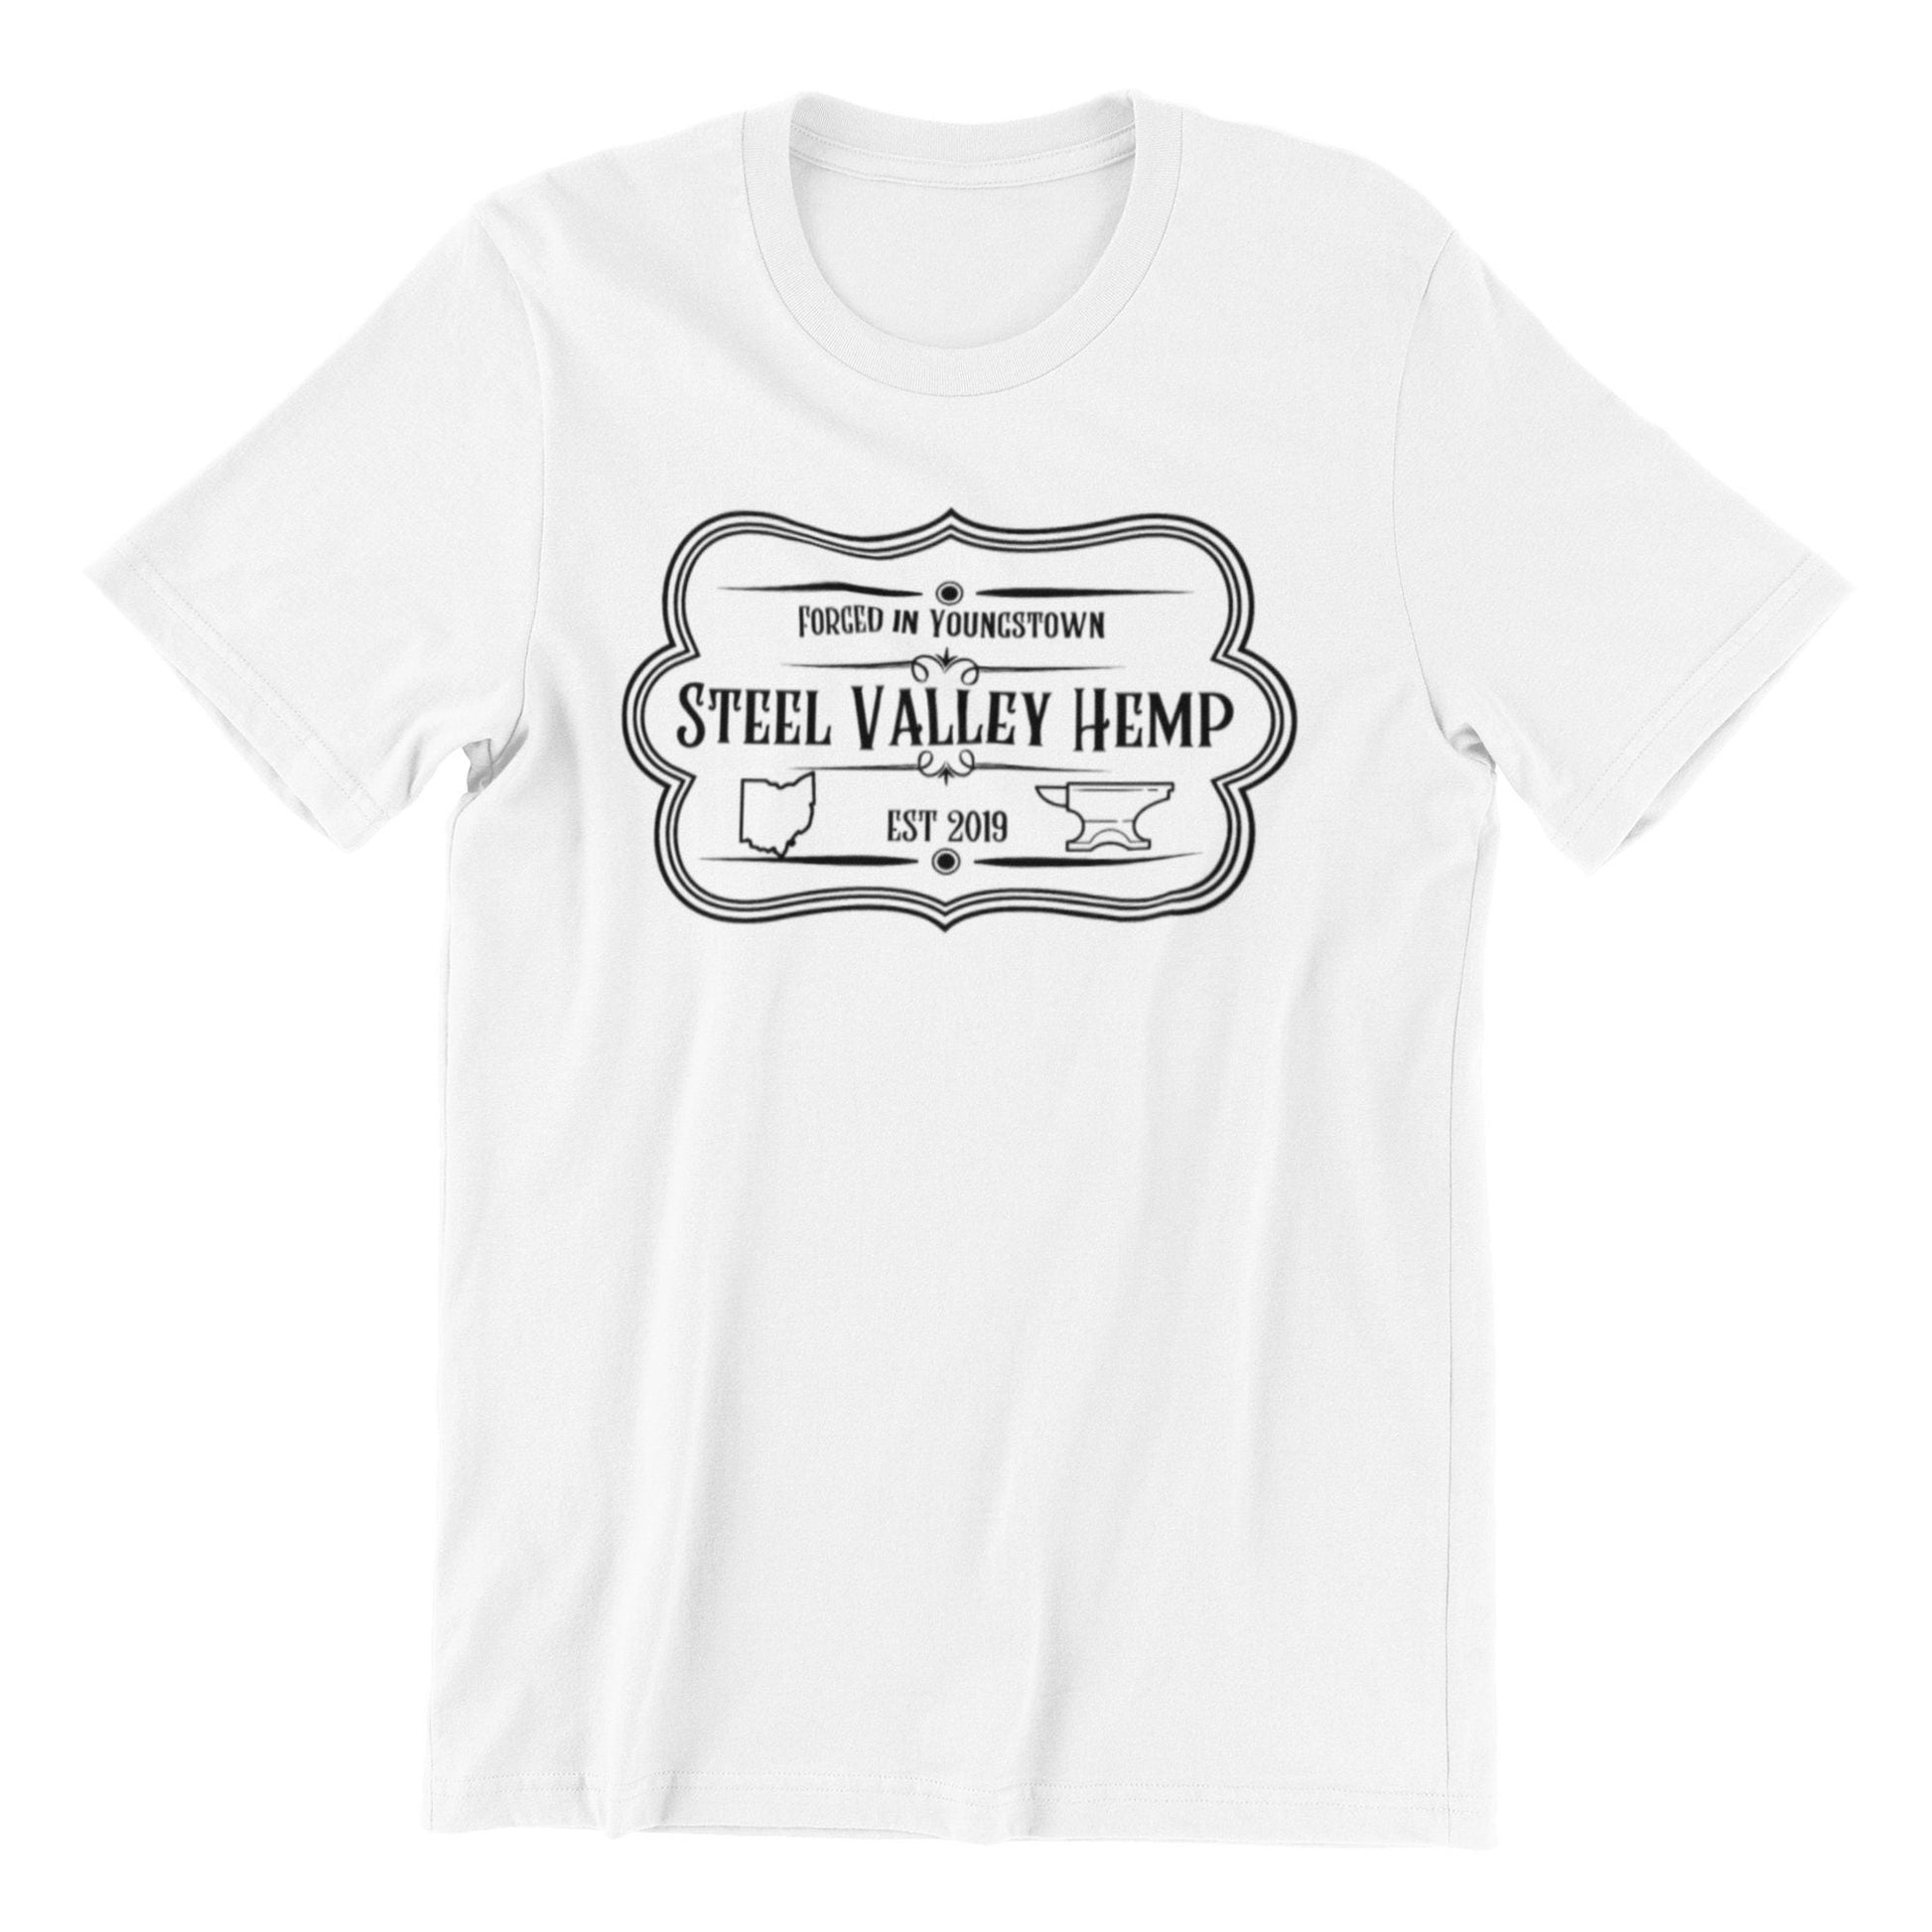 T-Shirt SVH Antique Sign Custom Shirt & Ink Color, Shirts and Tees, T-Shirt, Tees for Men and Women